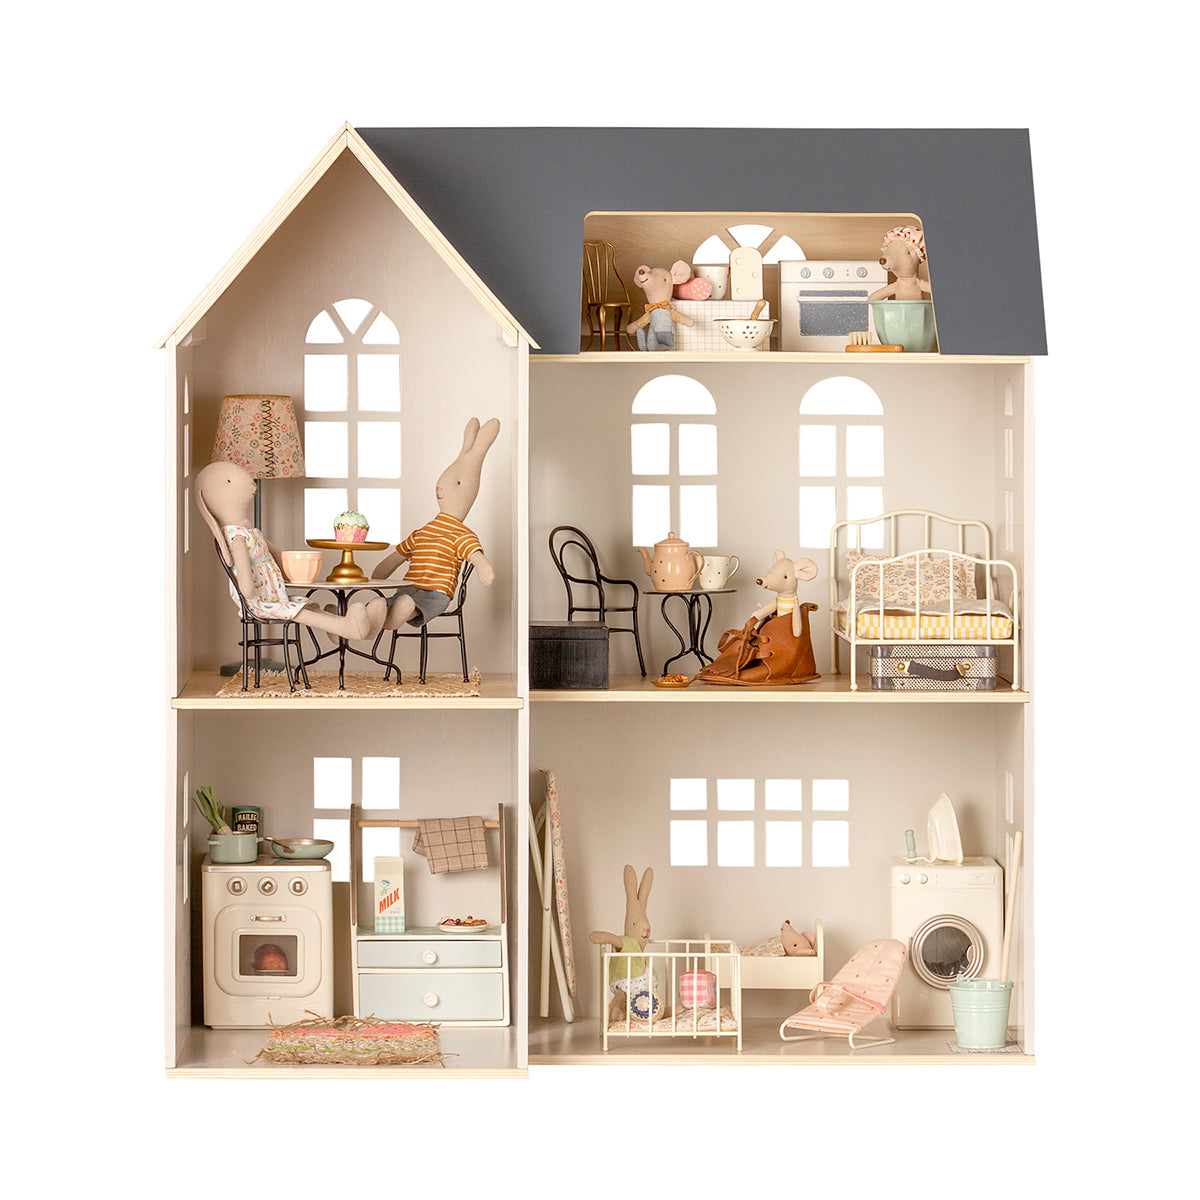 Maileg Dollhouse - House of Miniature and Maileg furniture and accessories